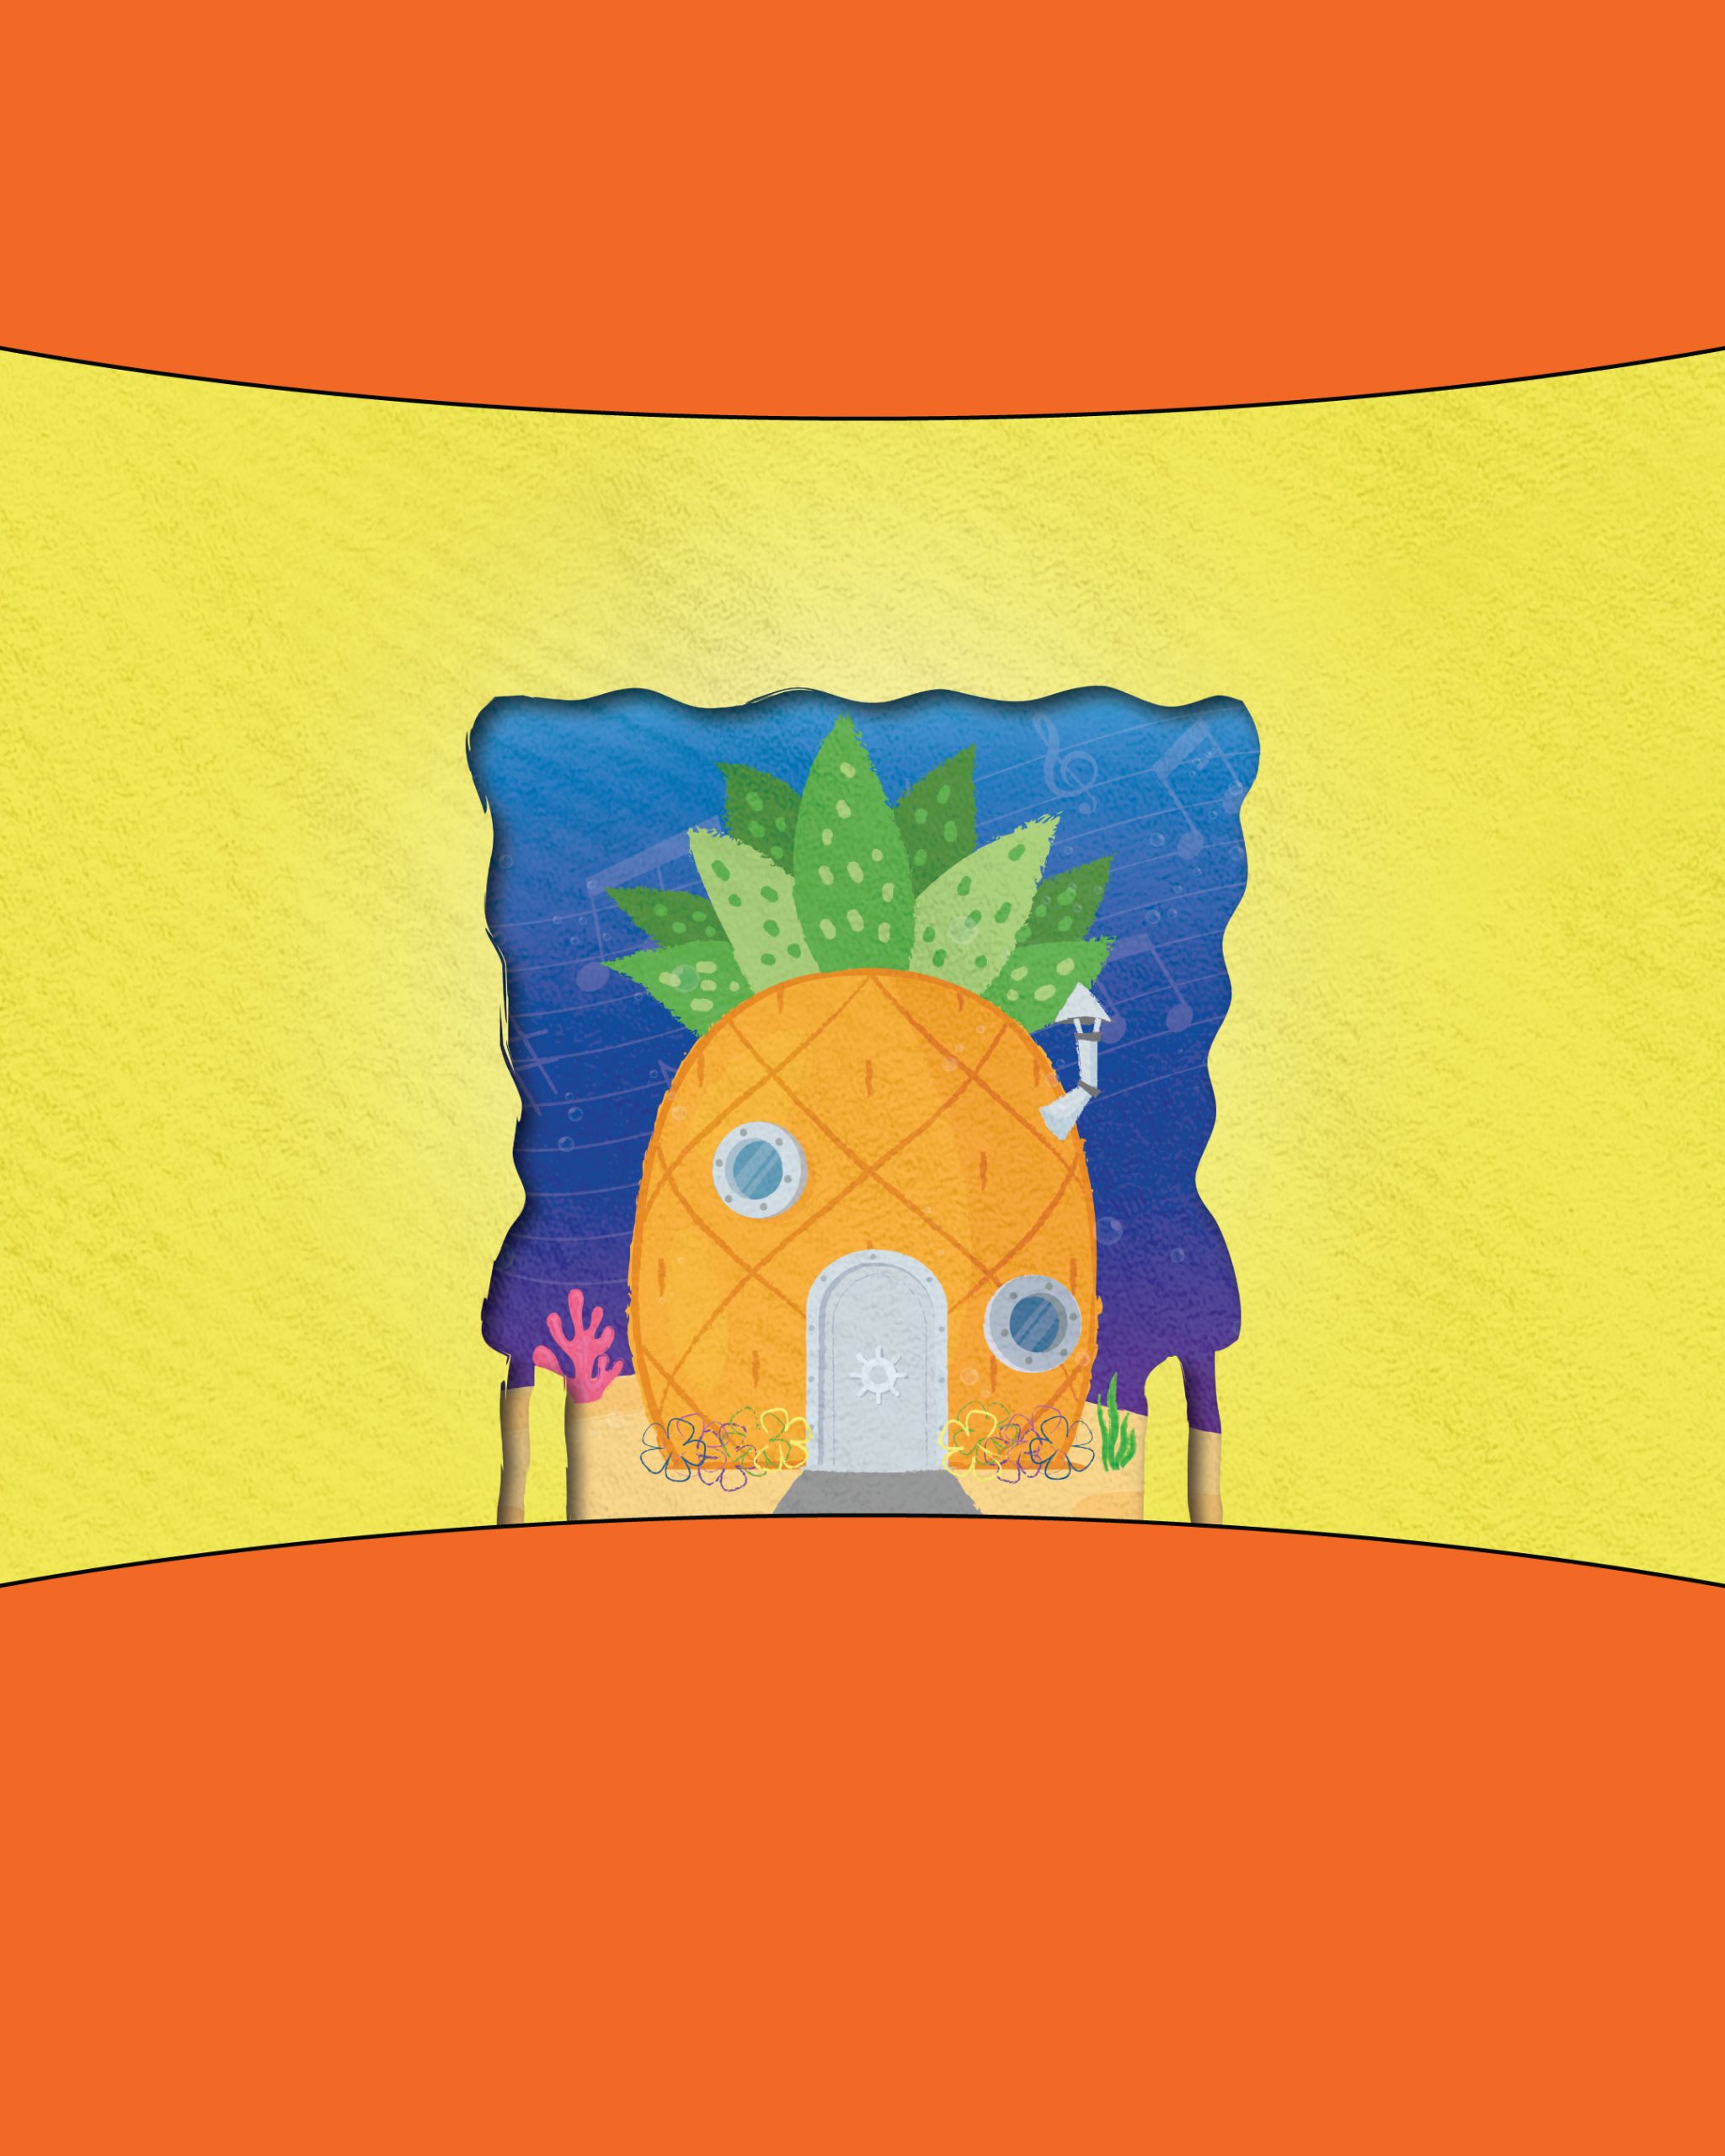 orange and yellow background with sponge outline and pineapple graphic